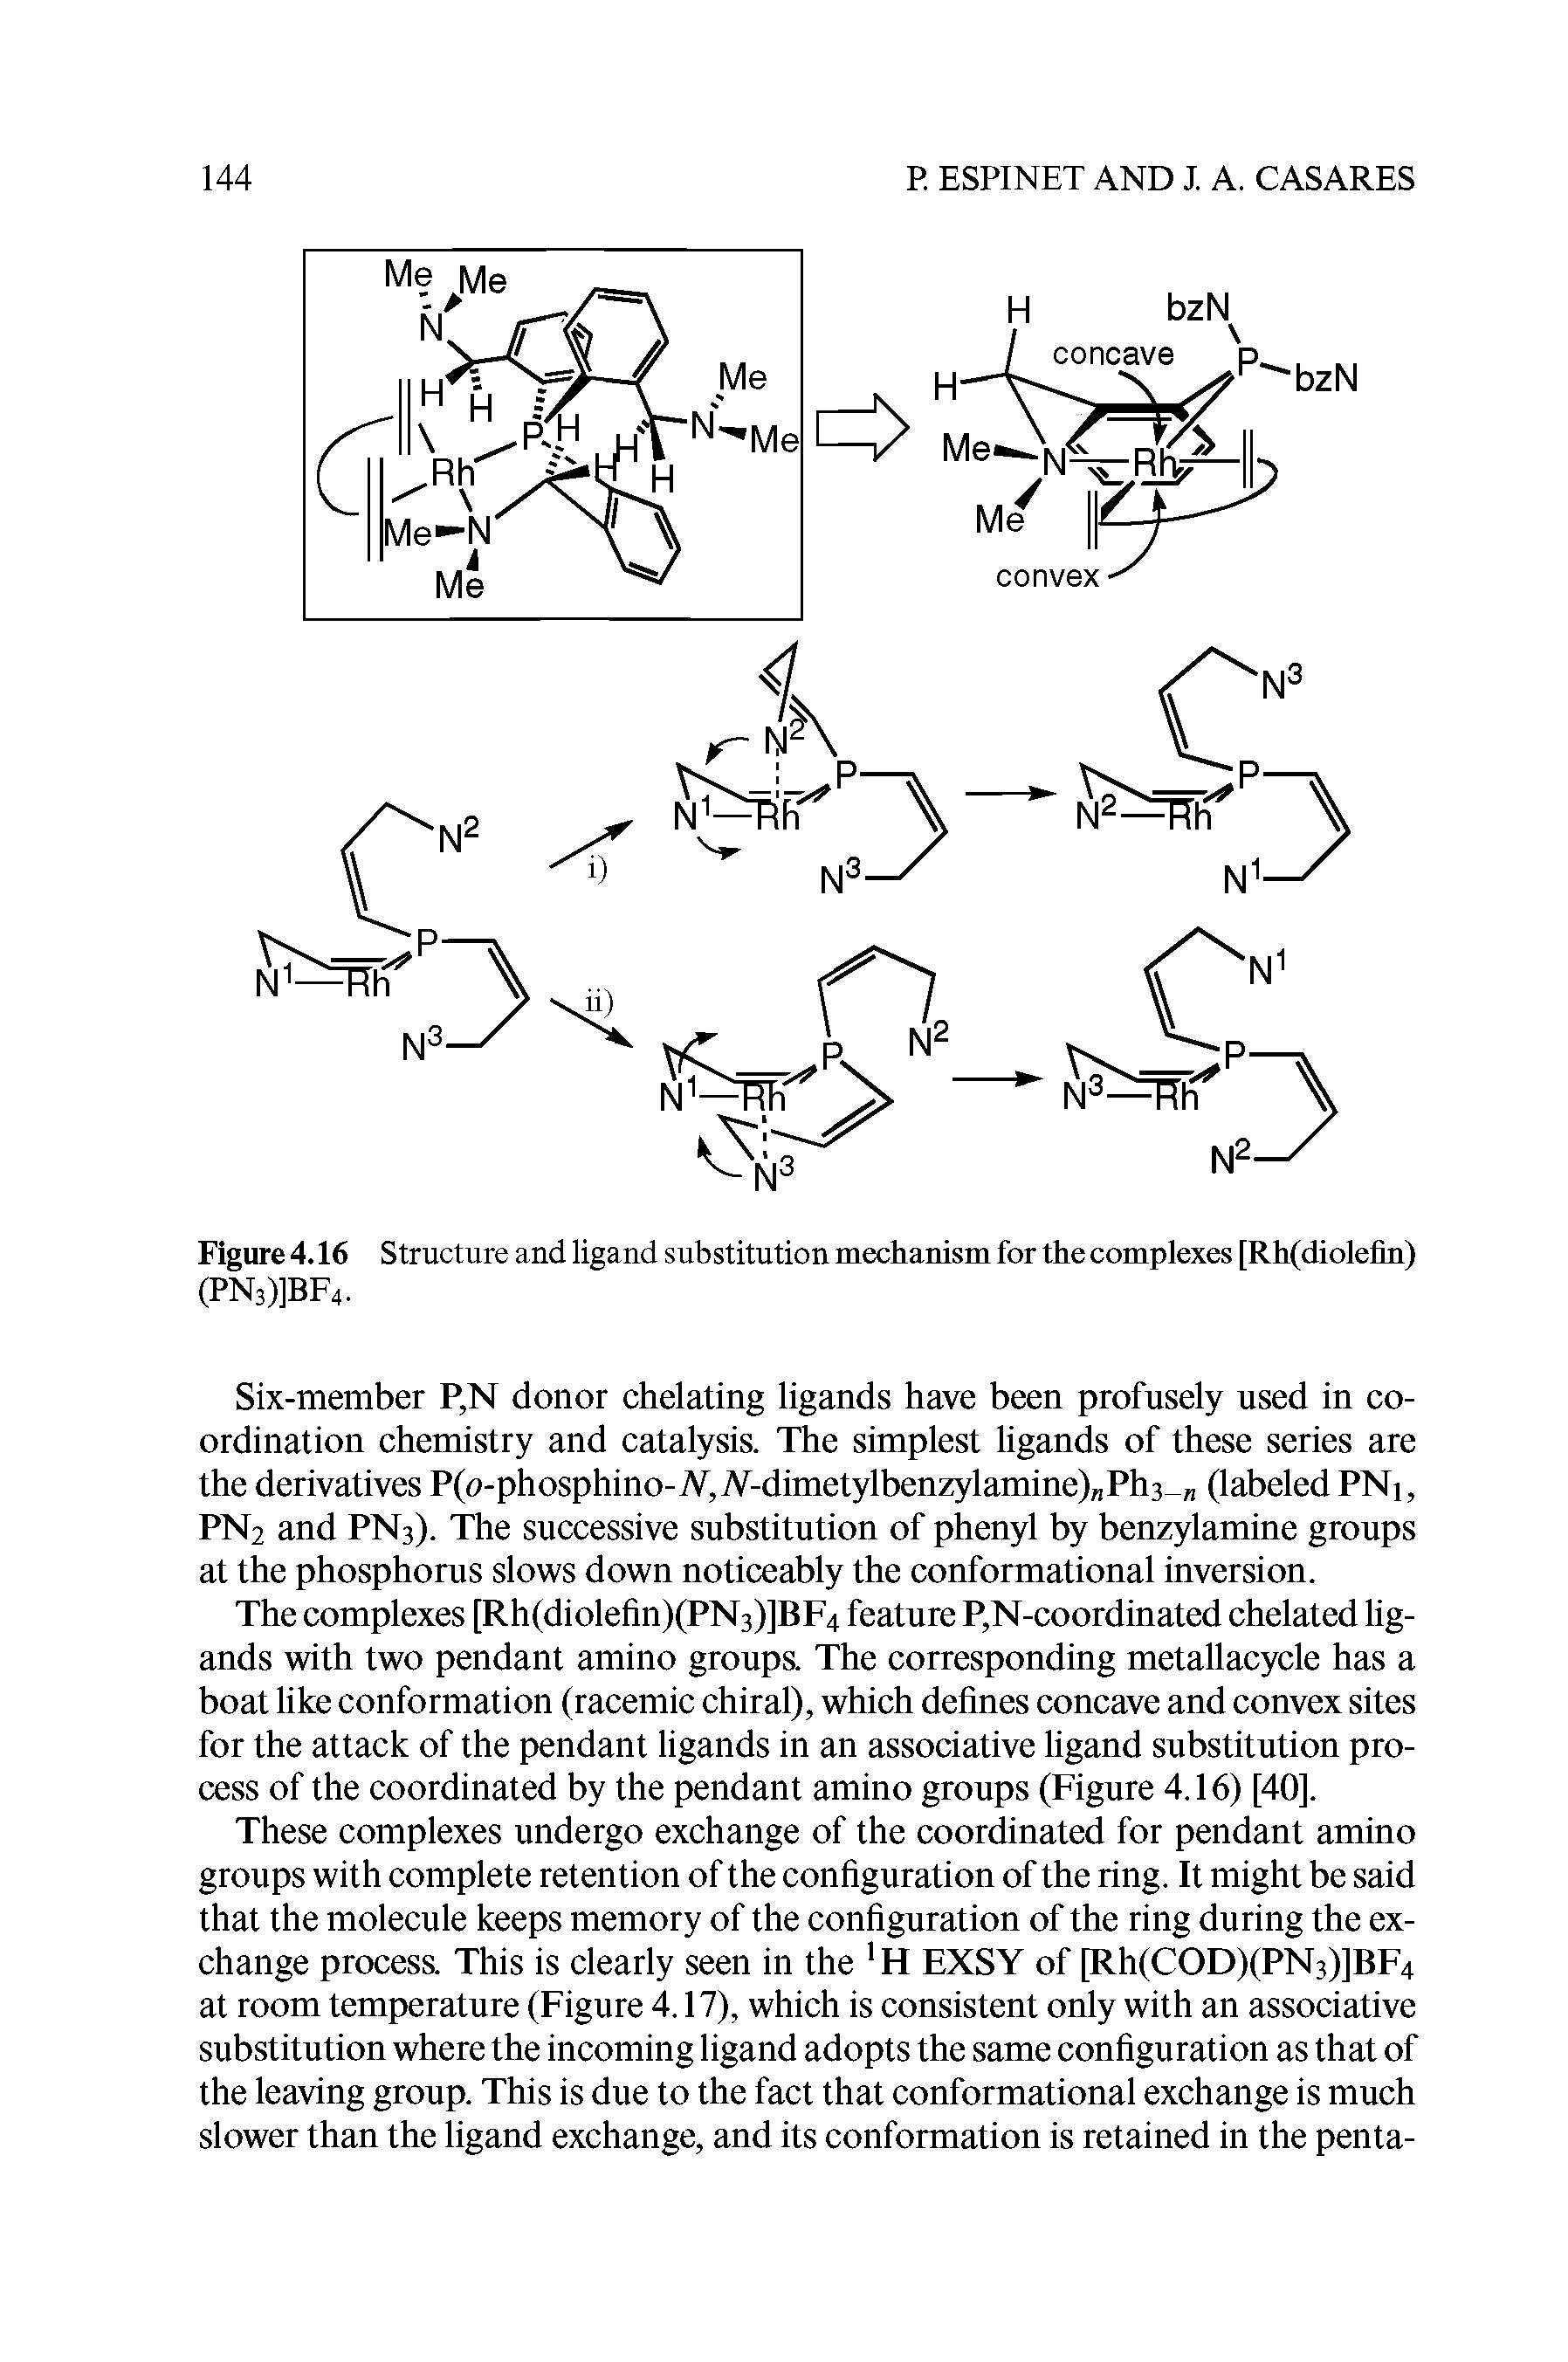 Figure 4.16 Structure and ligand substitution mechanism for the complexes [Rh(diolefin) (PN3)]BF4.